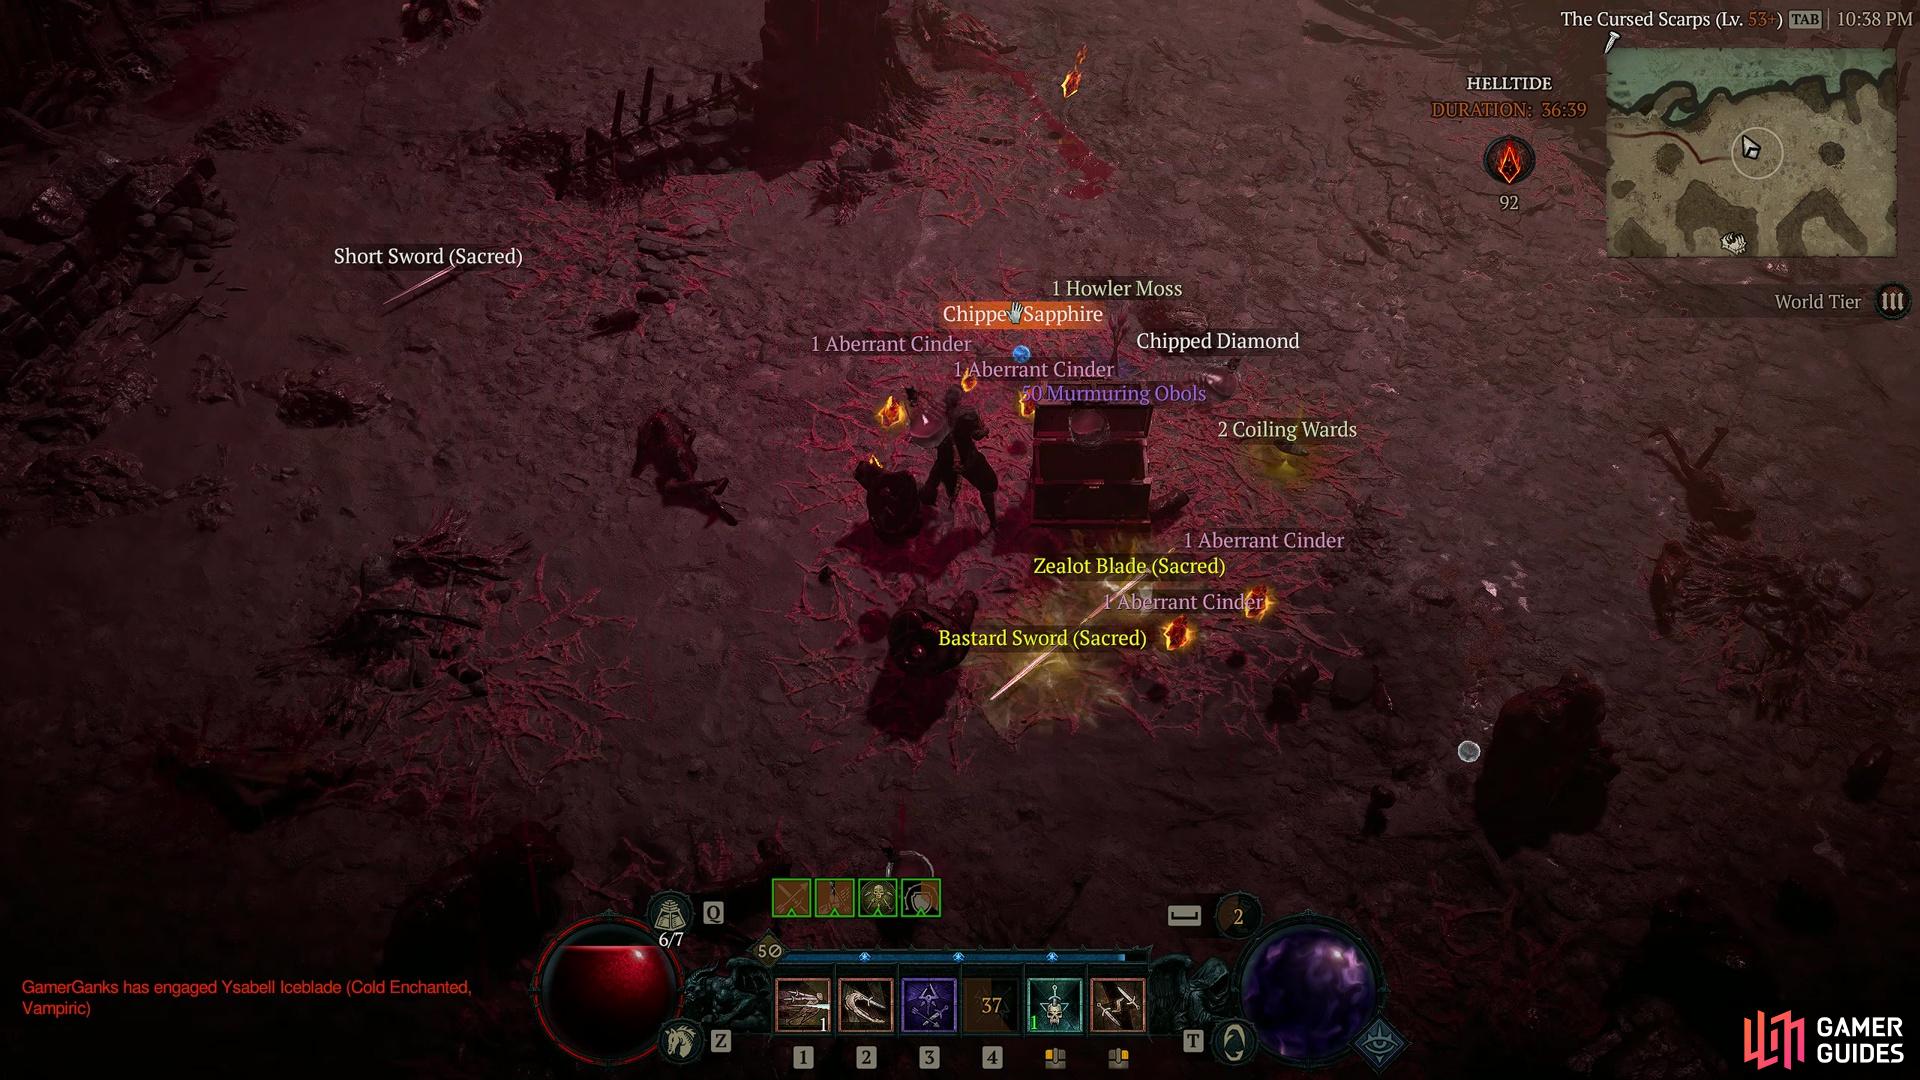 Coiling Wards in Diablo 4, among other legendary crafting resources, can drop from the Helltide event.